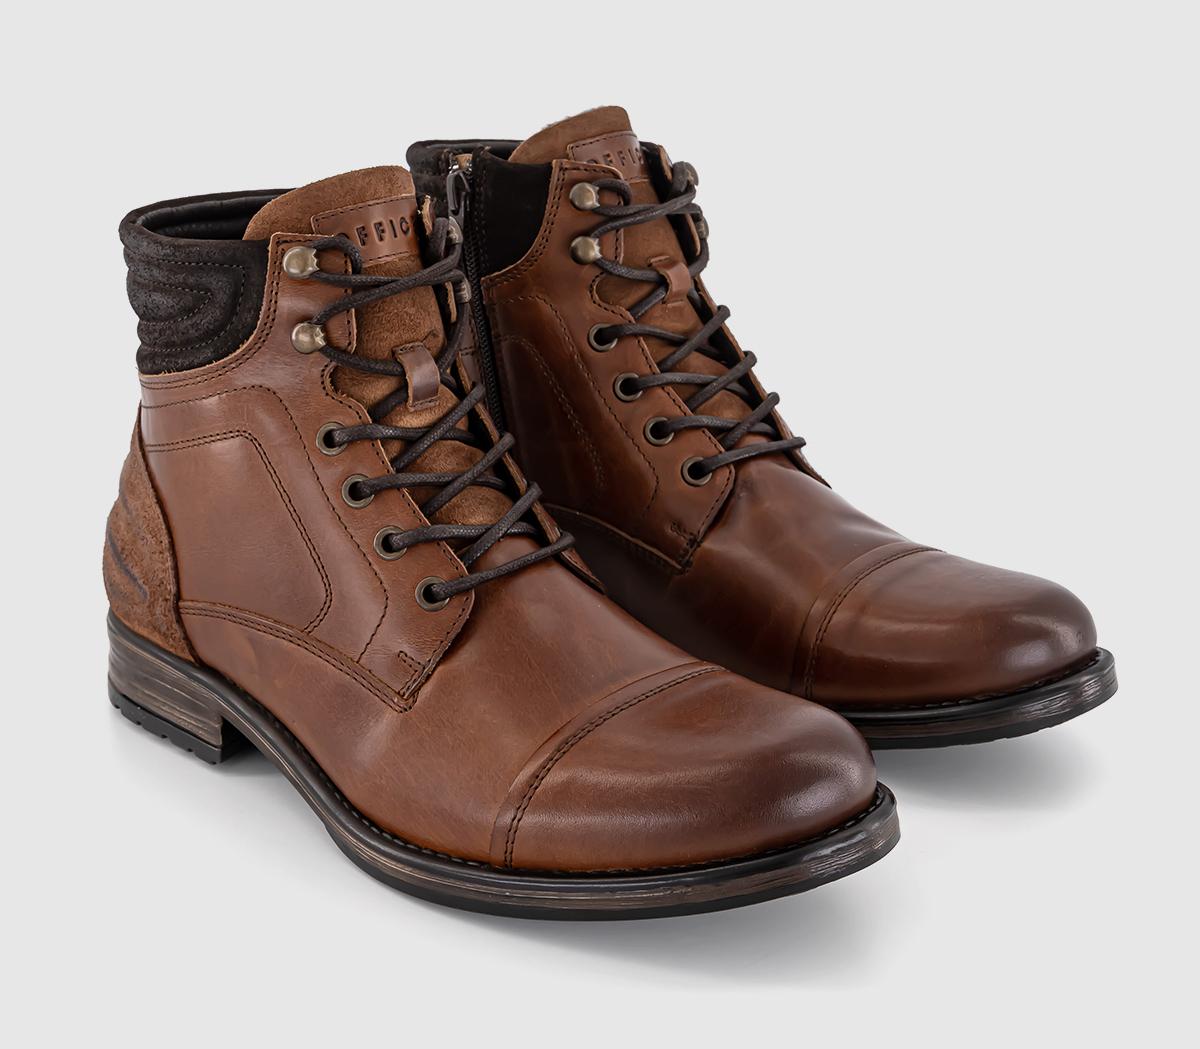 OFFICE Brecon Toe Cap Boots Brown Leather - Men’s Boots